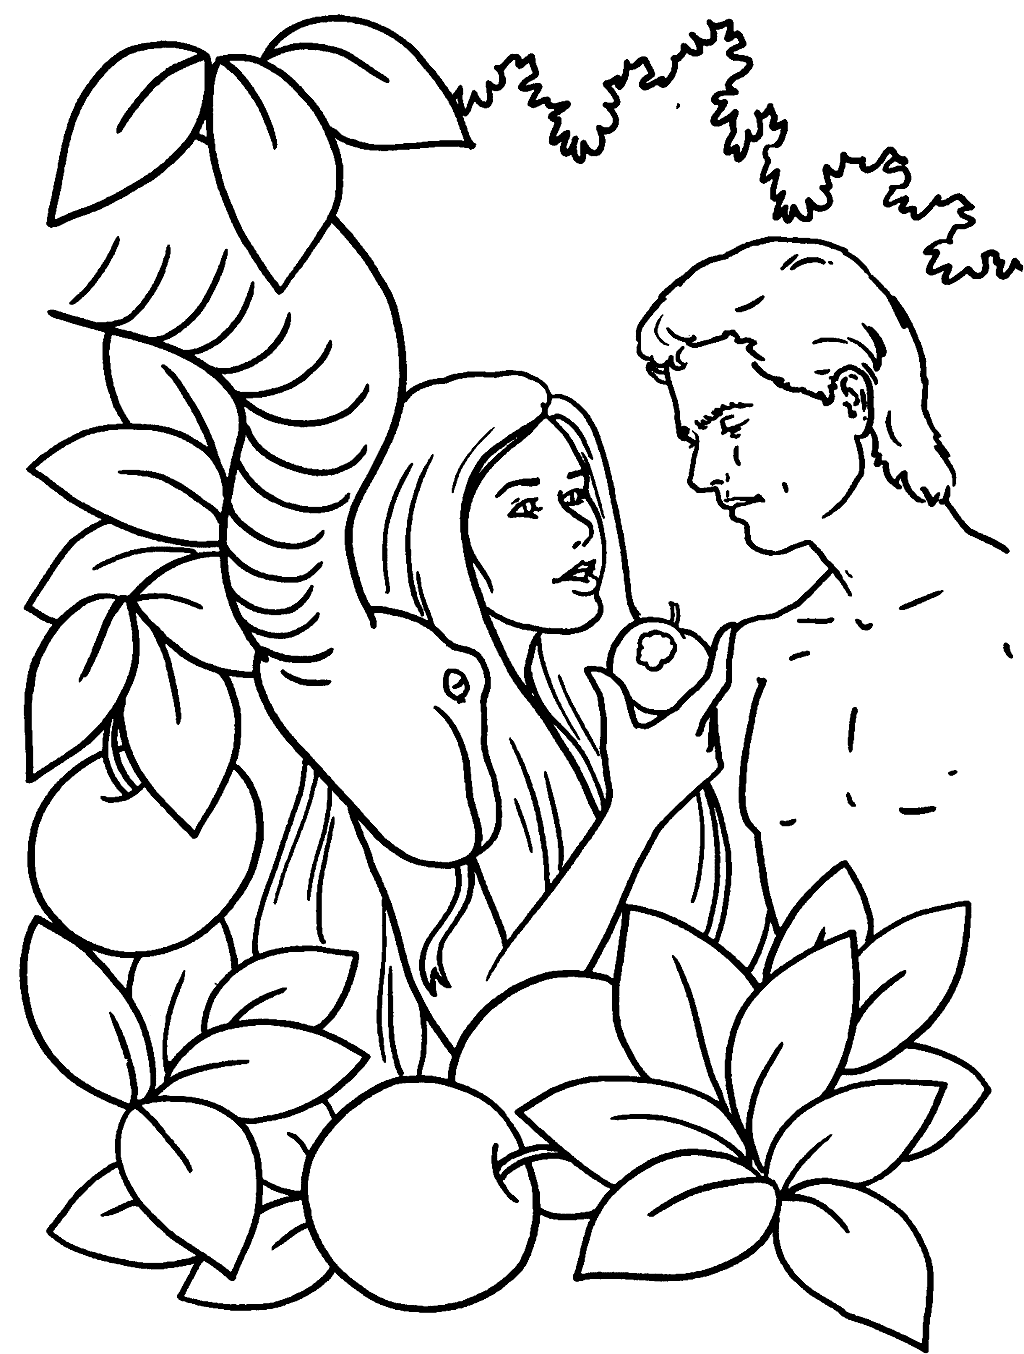 Adam and Eve Bible Story Coloring Sheet